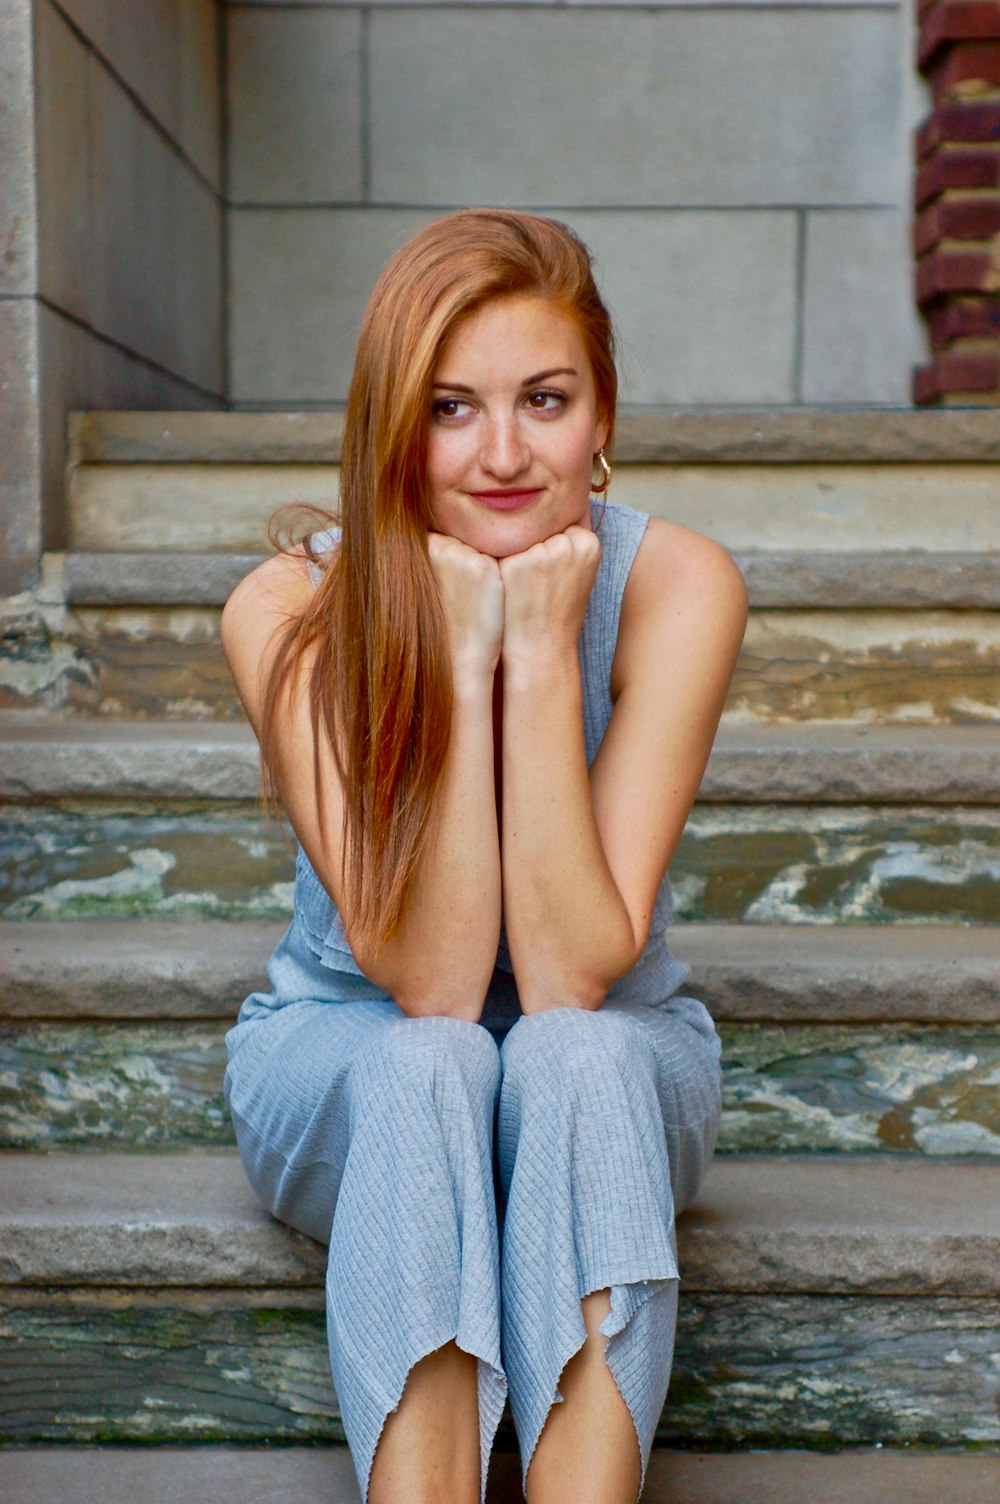 woman in gray tank top and gray pants sitting on gray concrete stairs